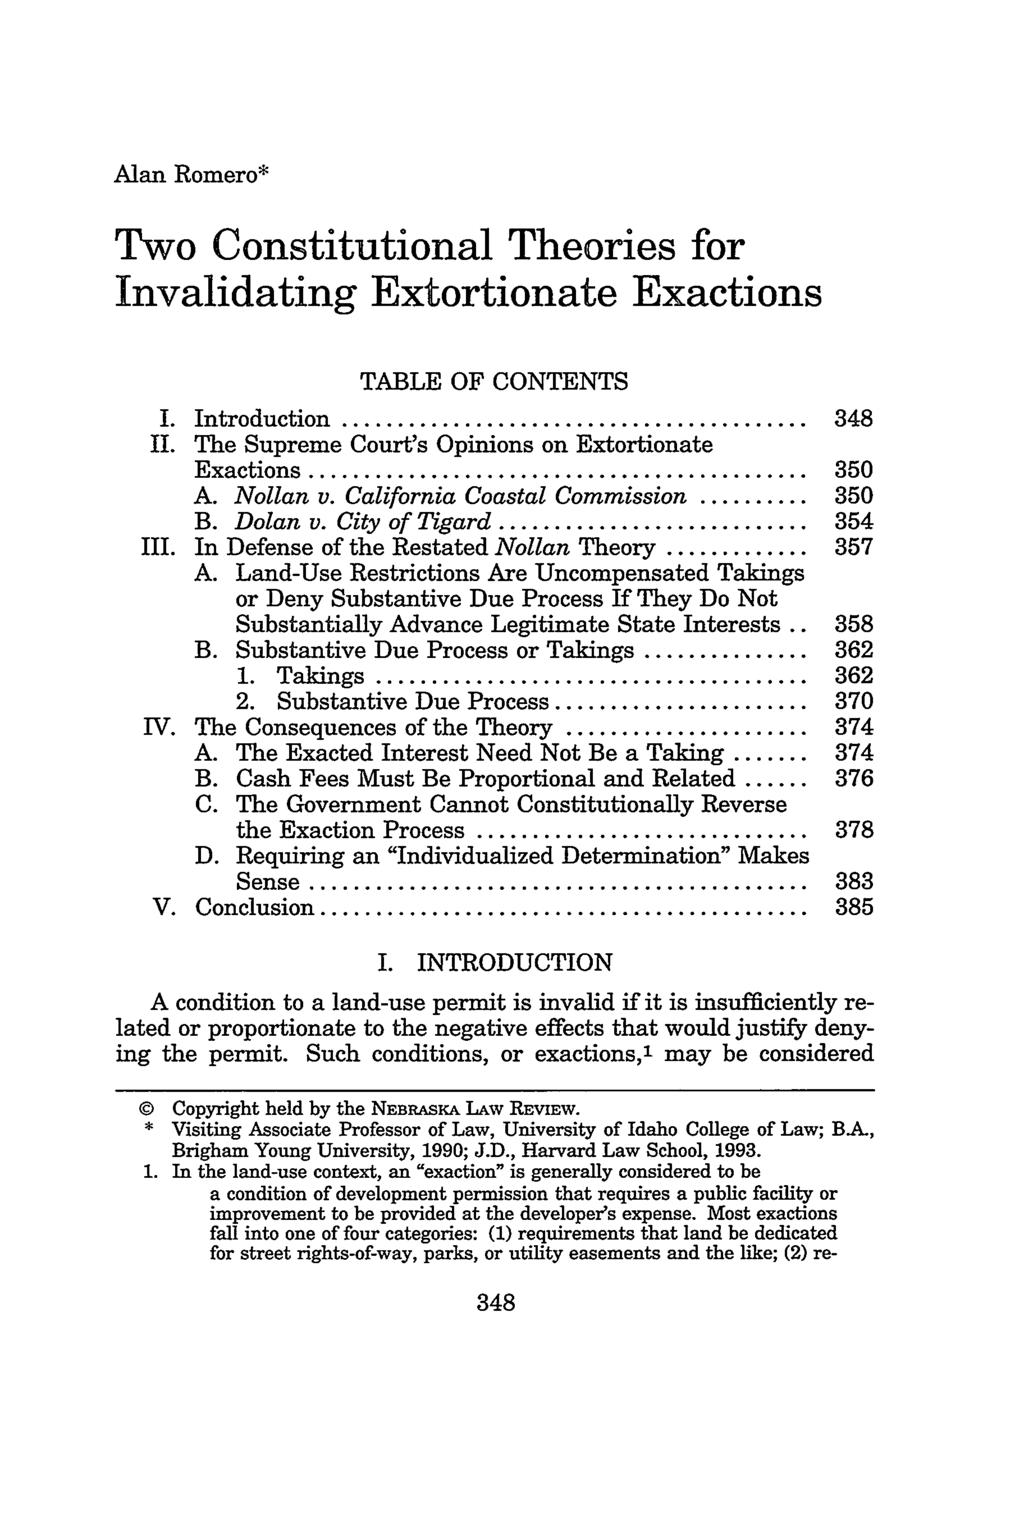 Alan Romero* Two Constitutional Theories for Invalidating Extortionate Exactions TABLE OF CONTENTS I. Introduction... 348 II. The Supreme Court's Opinions on Extortionate Exactions... 350 A. Nollan v.